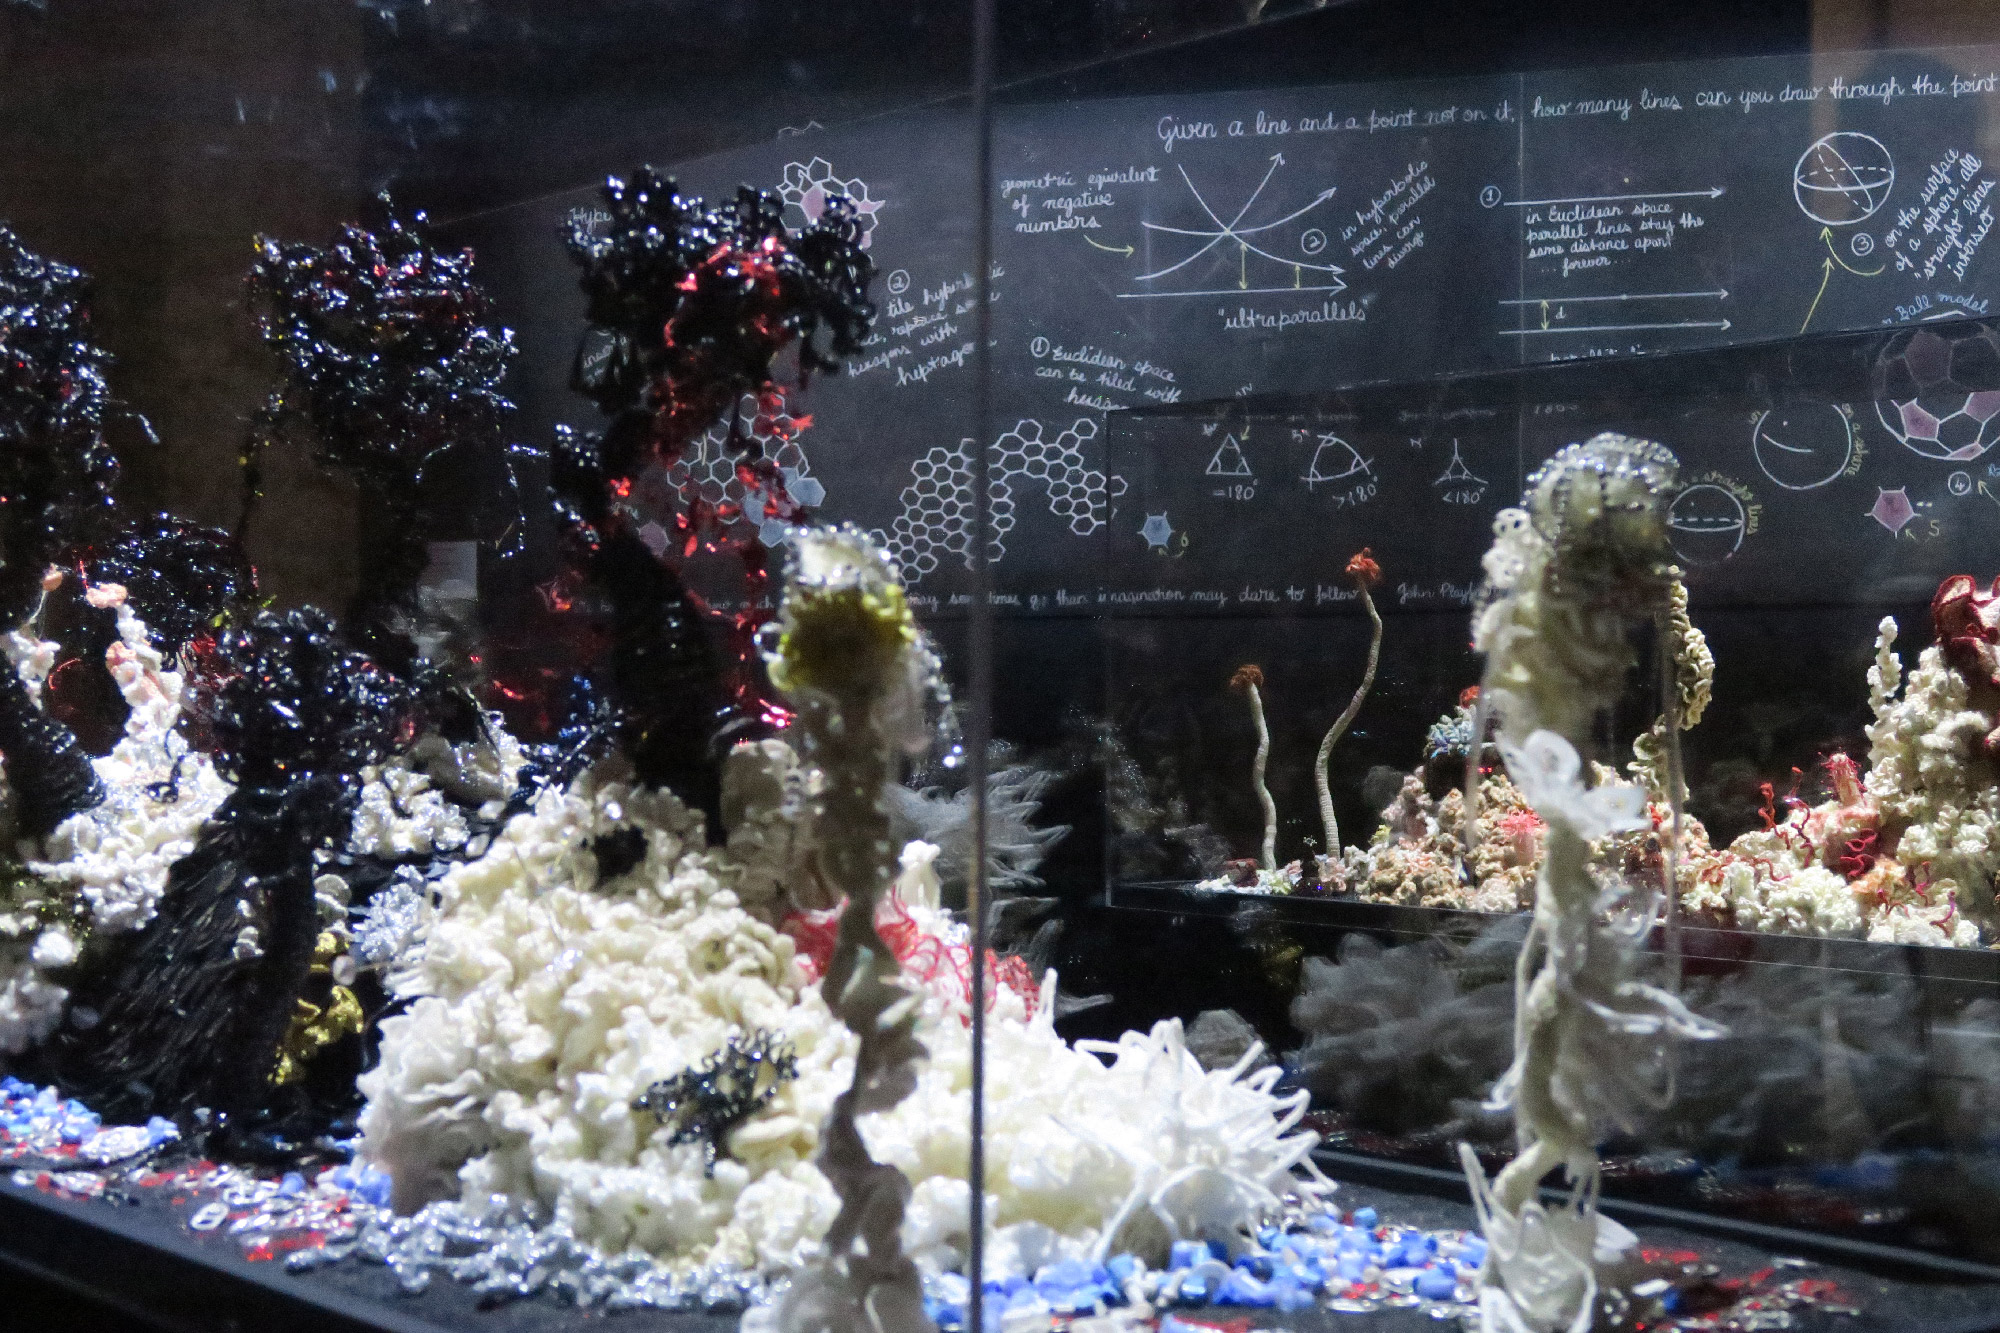 Reef sculptures in a gallery with a black board in the background